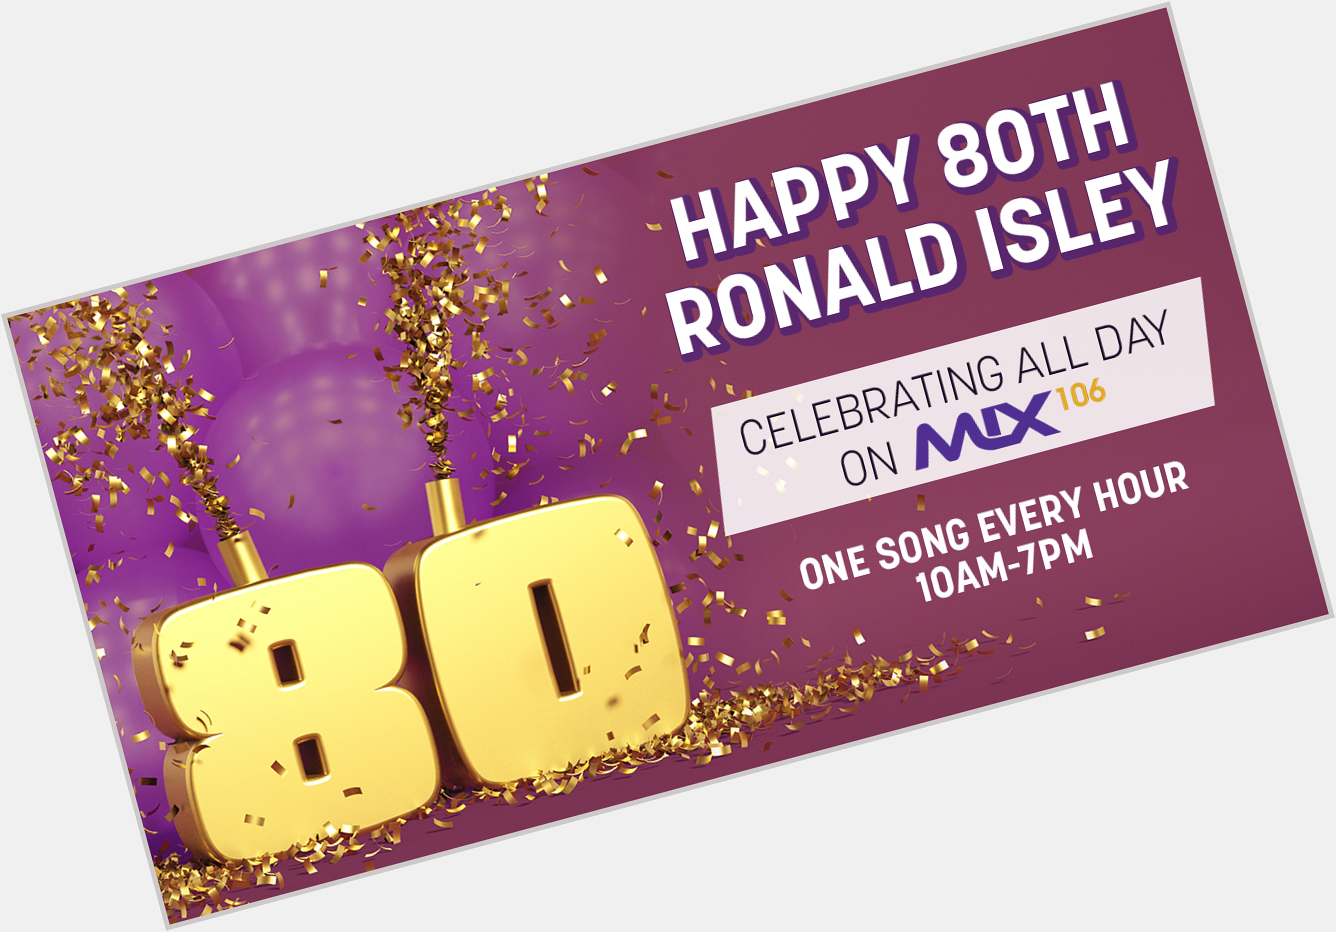 Happy 80th birthday, Ronald Isley! We re celebrating all day long today! Tune in! 